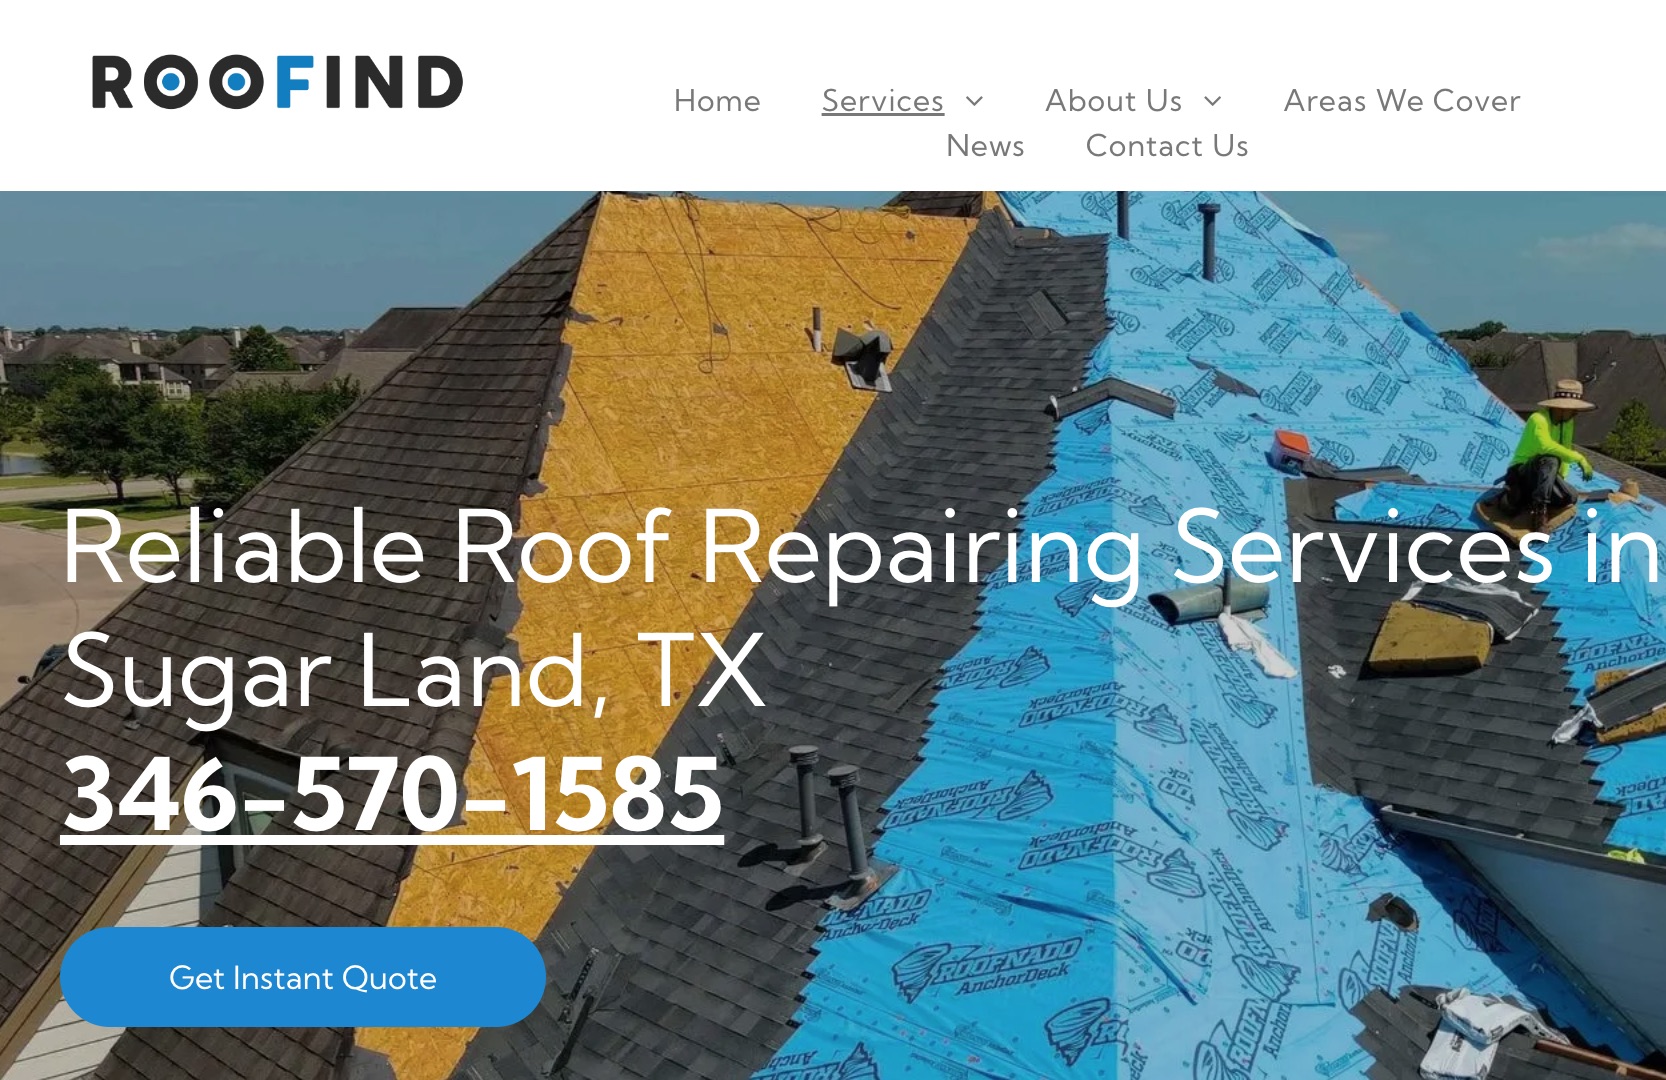 Crafting Durability: Roofind’s Commitment to Roofing in Houston